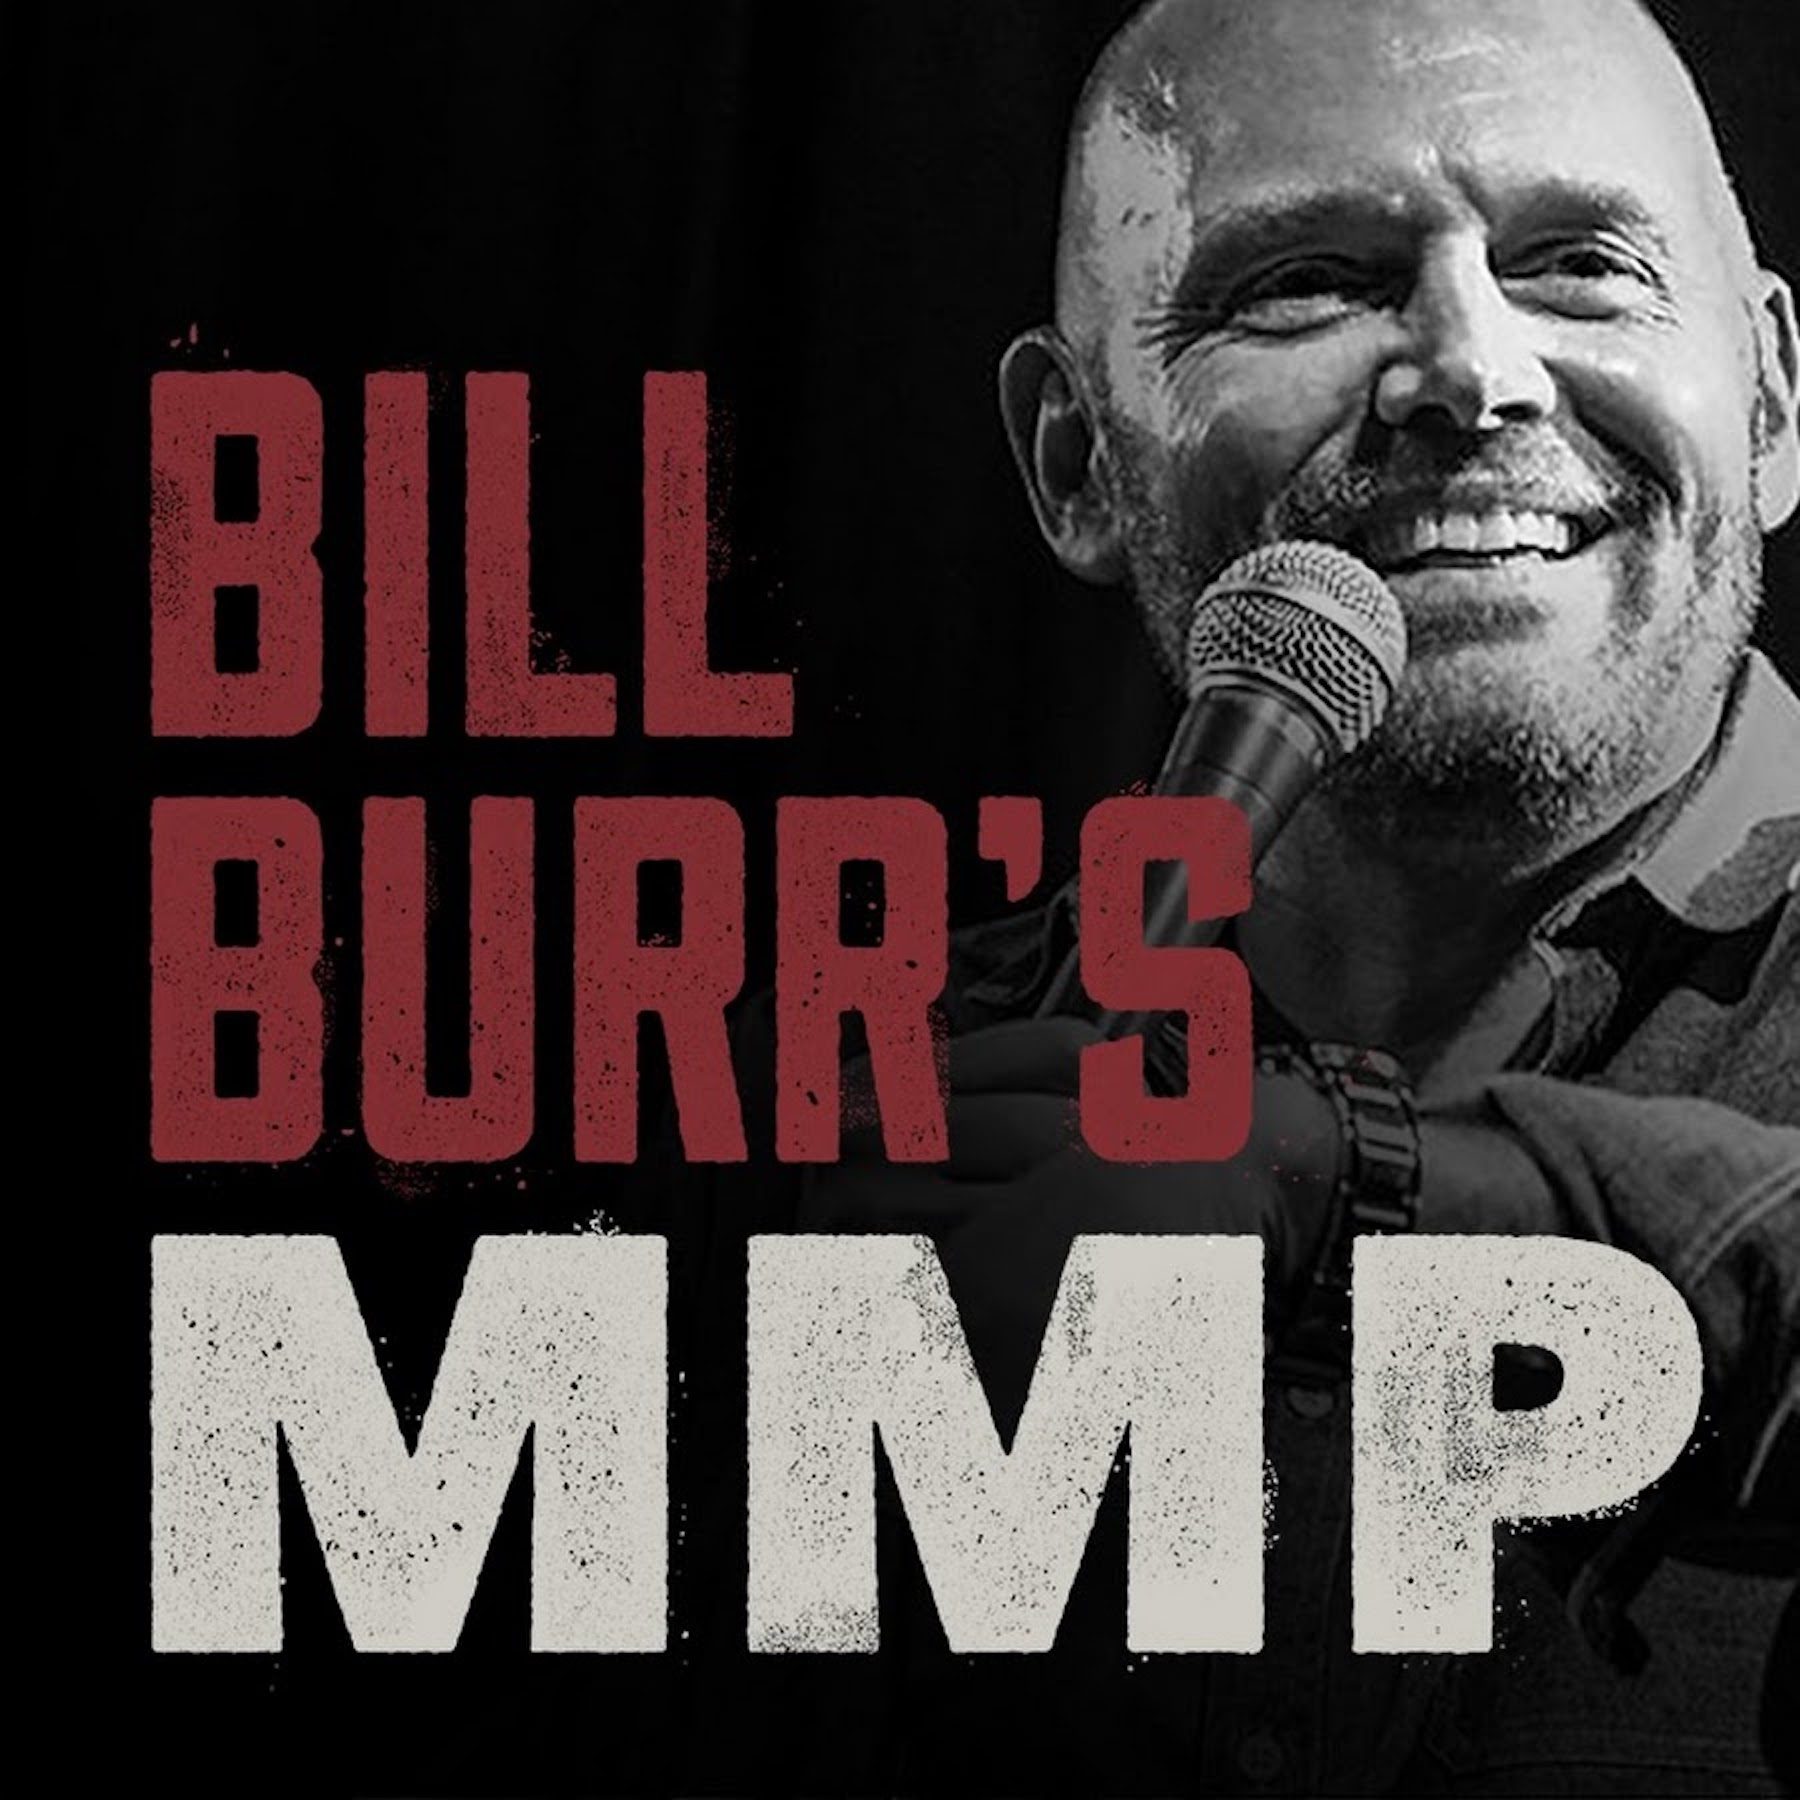 Artwork for Bill Burr's Monday Morning podcast featuring black and white image of comedian and red text.